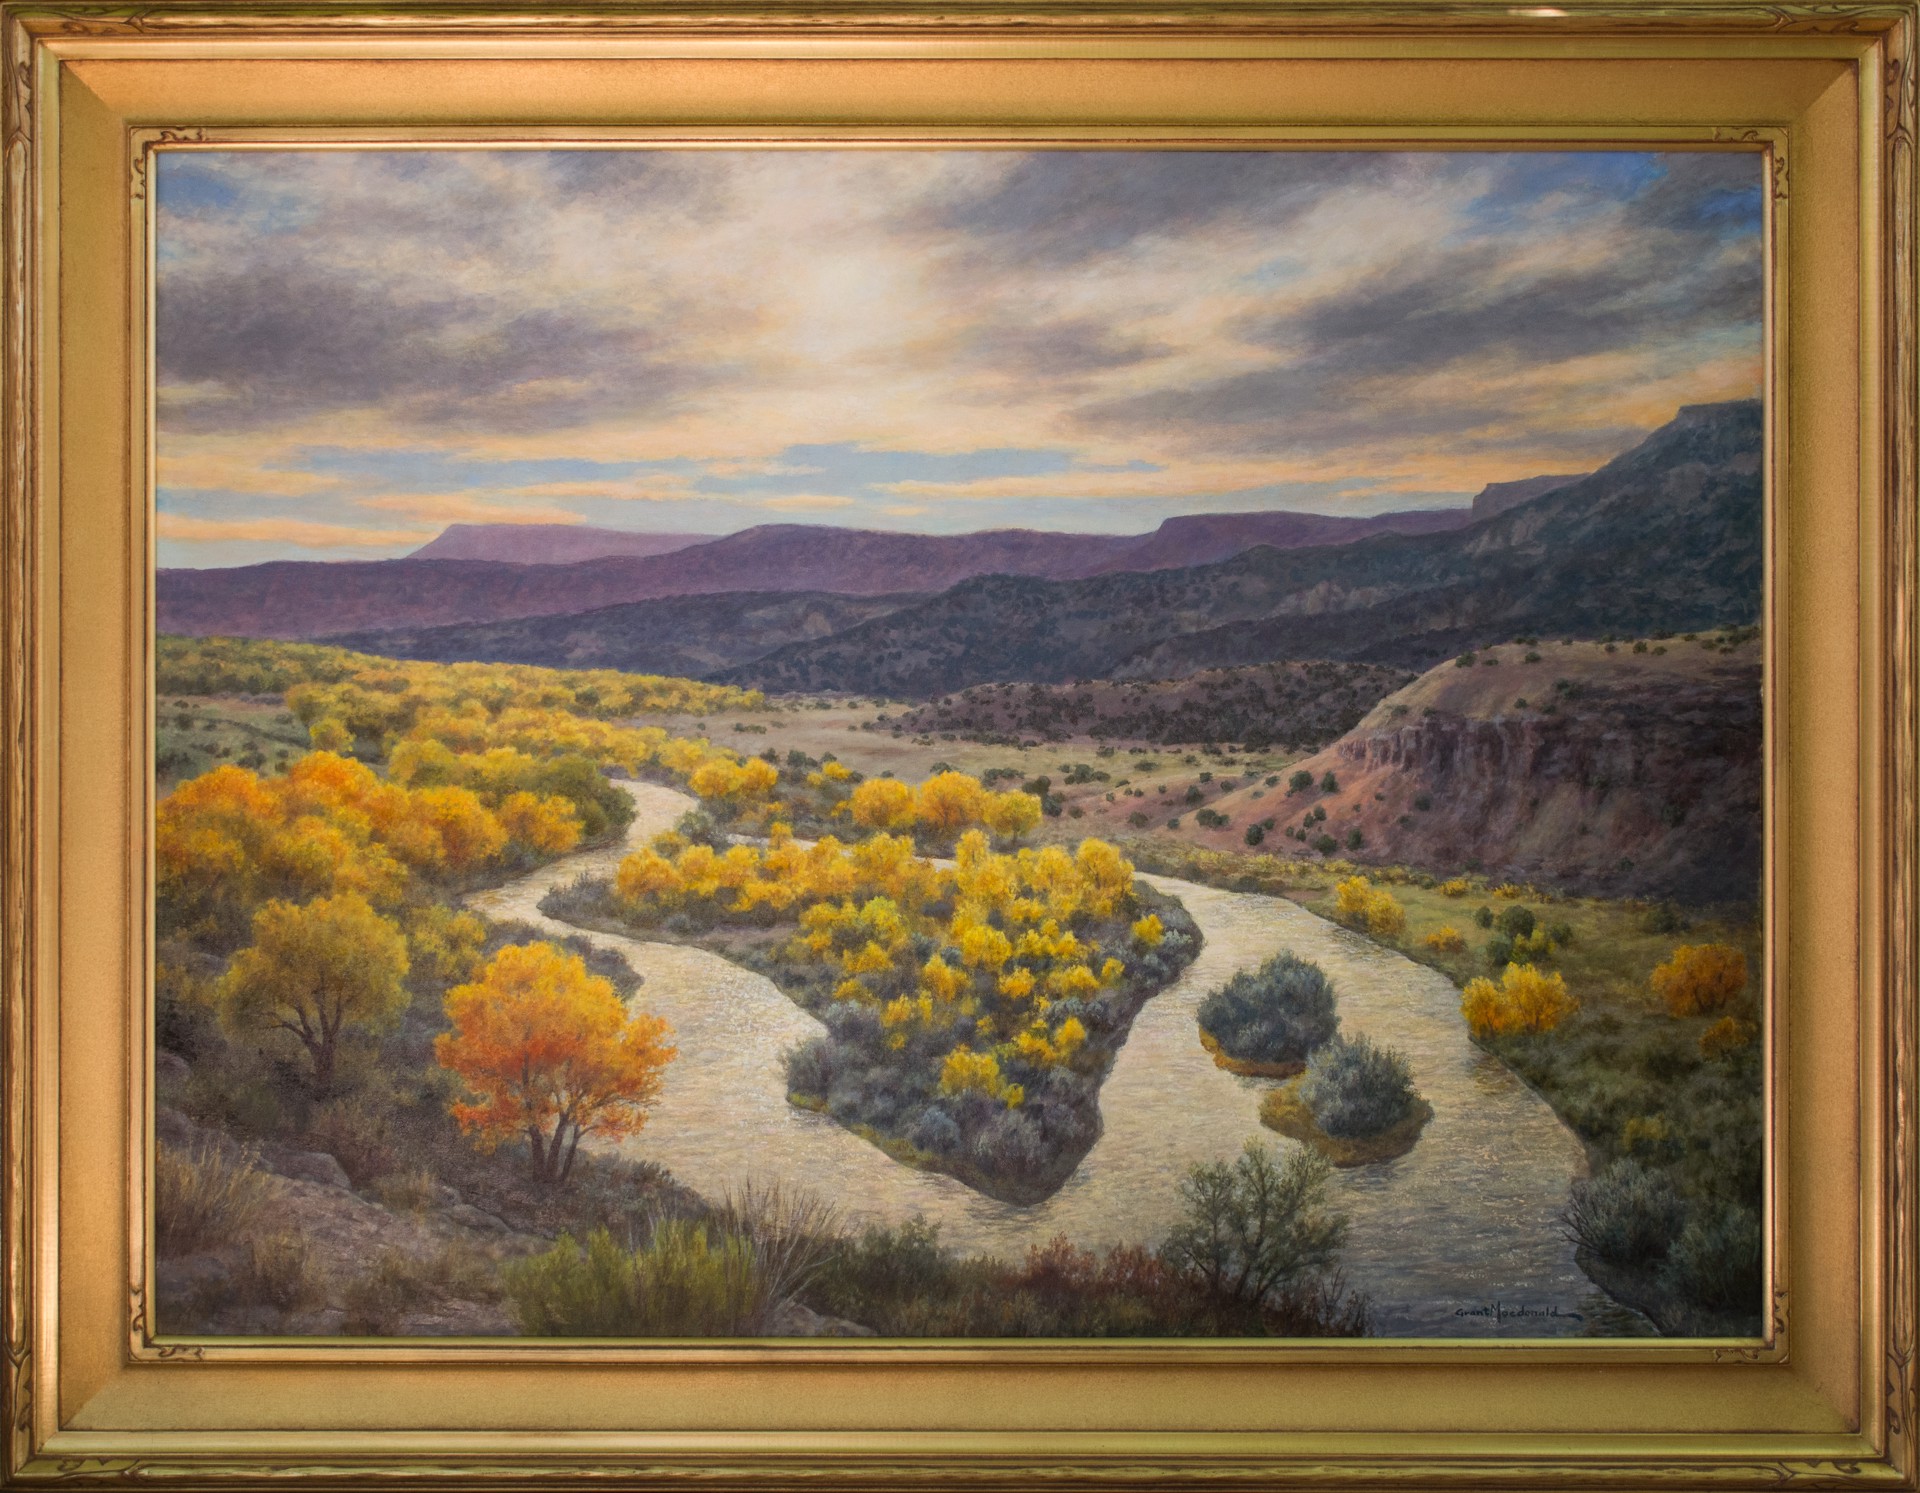 Golden Morning on the Chama by Grant Macdonald